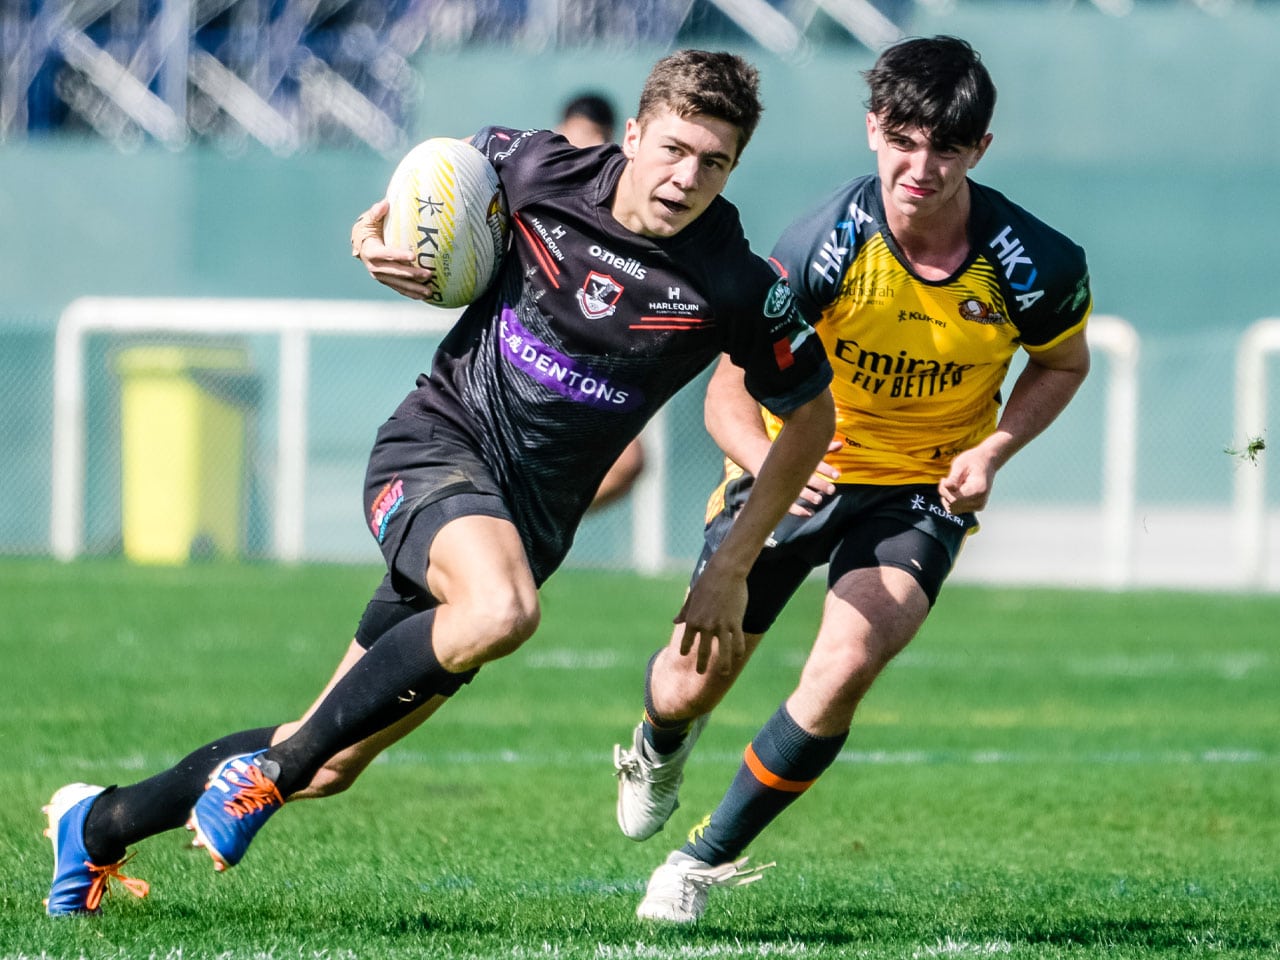 Dubai Exiles Under 19 youth rugby player off to score a try